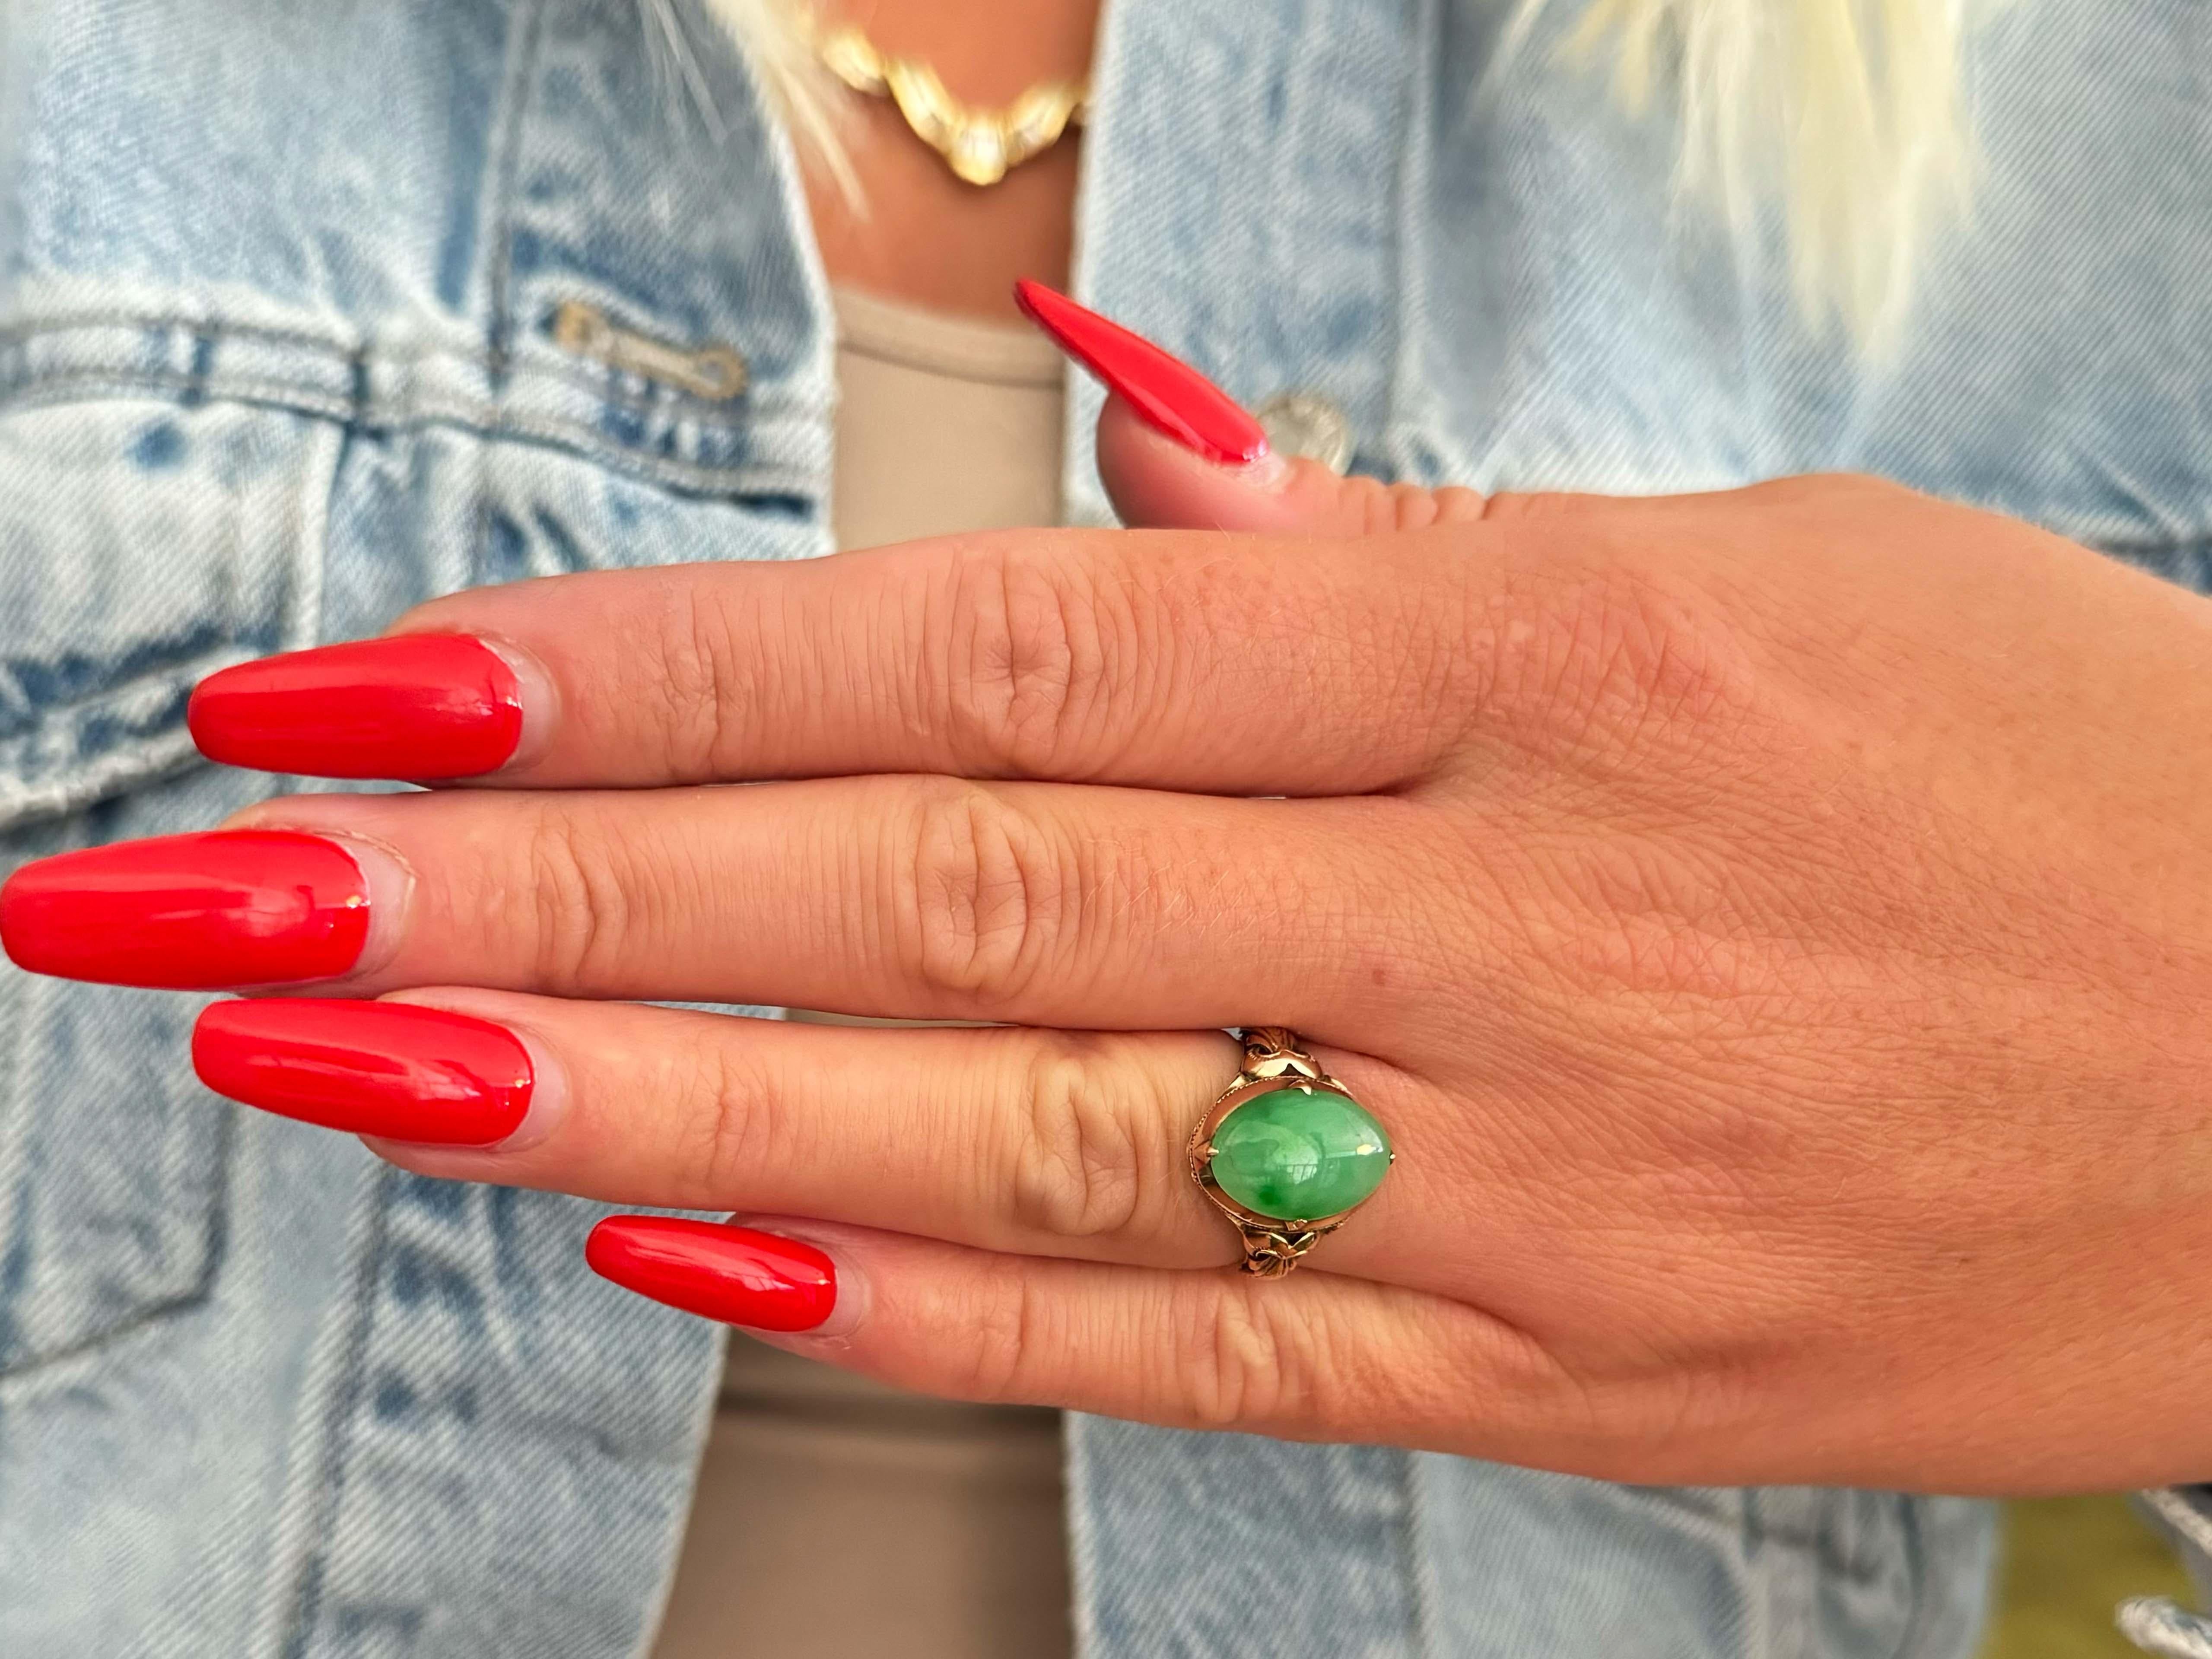 Item Specifications:

Metal: 14k Rose Gold 

Style: Statement Ring

Ring Size: 5.25 (resizing available for a fee)

Total Weight: 2.9 Grams

Gemstone Specifications:

Center Gemstone: Jadeite Jade

Shape: Oval

Color: Green

Cut: Cabochon 

Jade